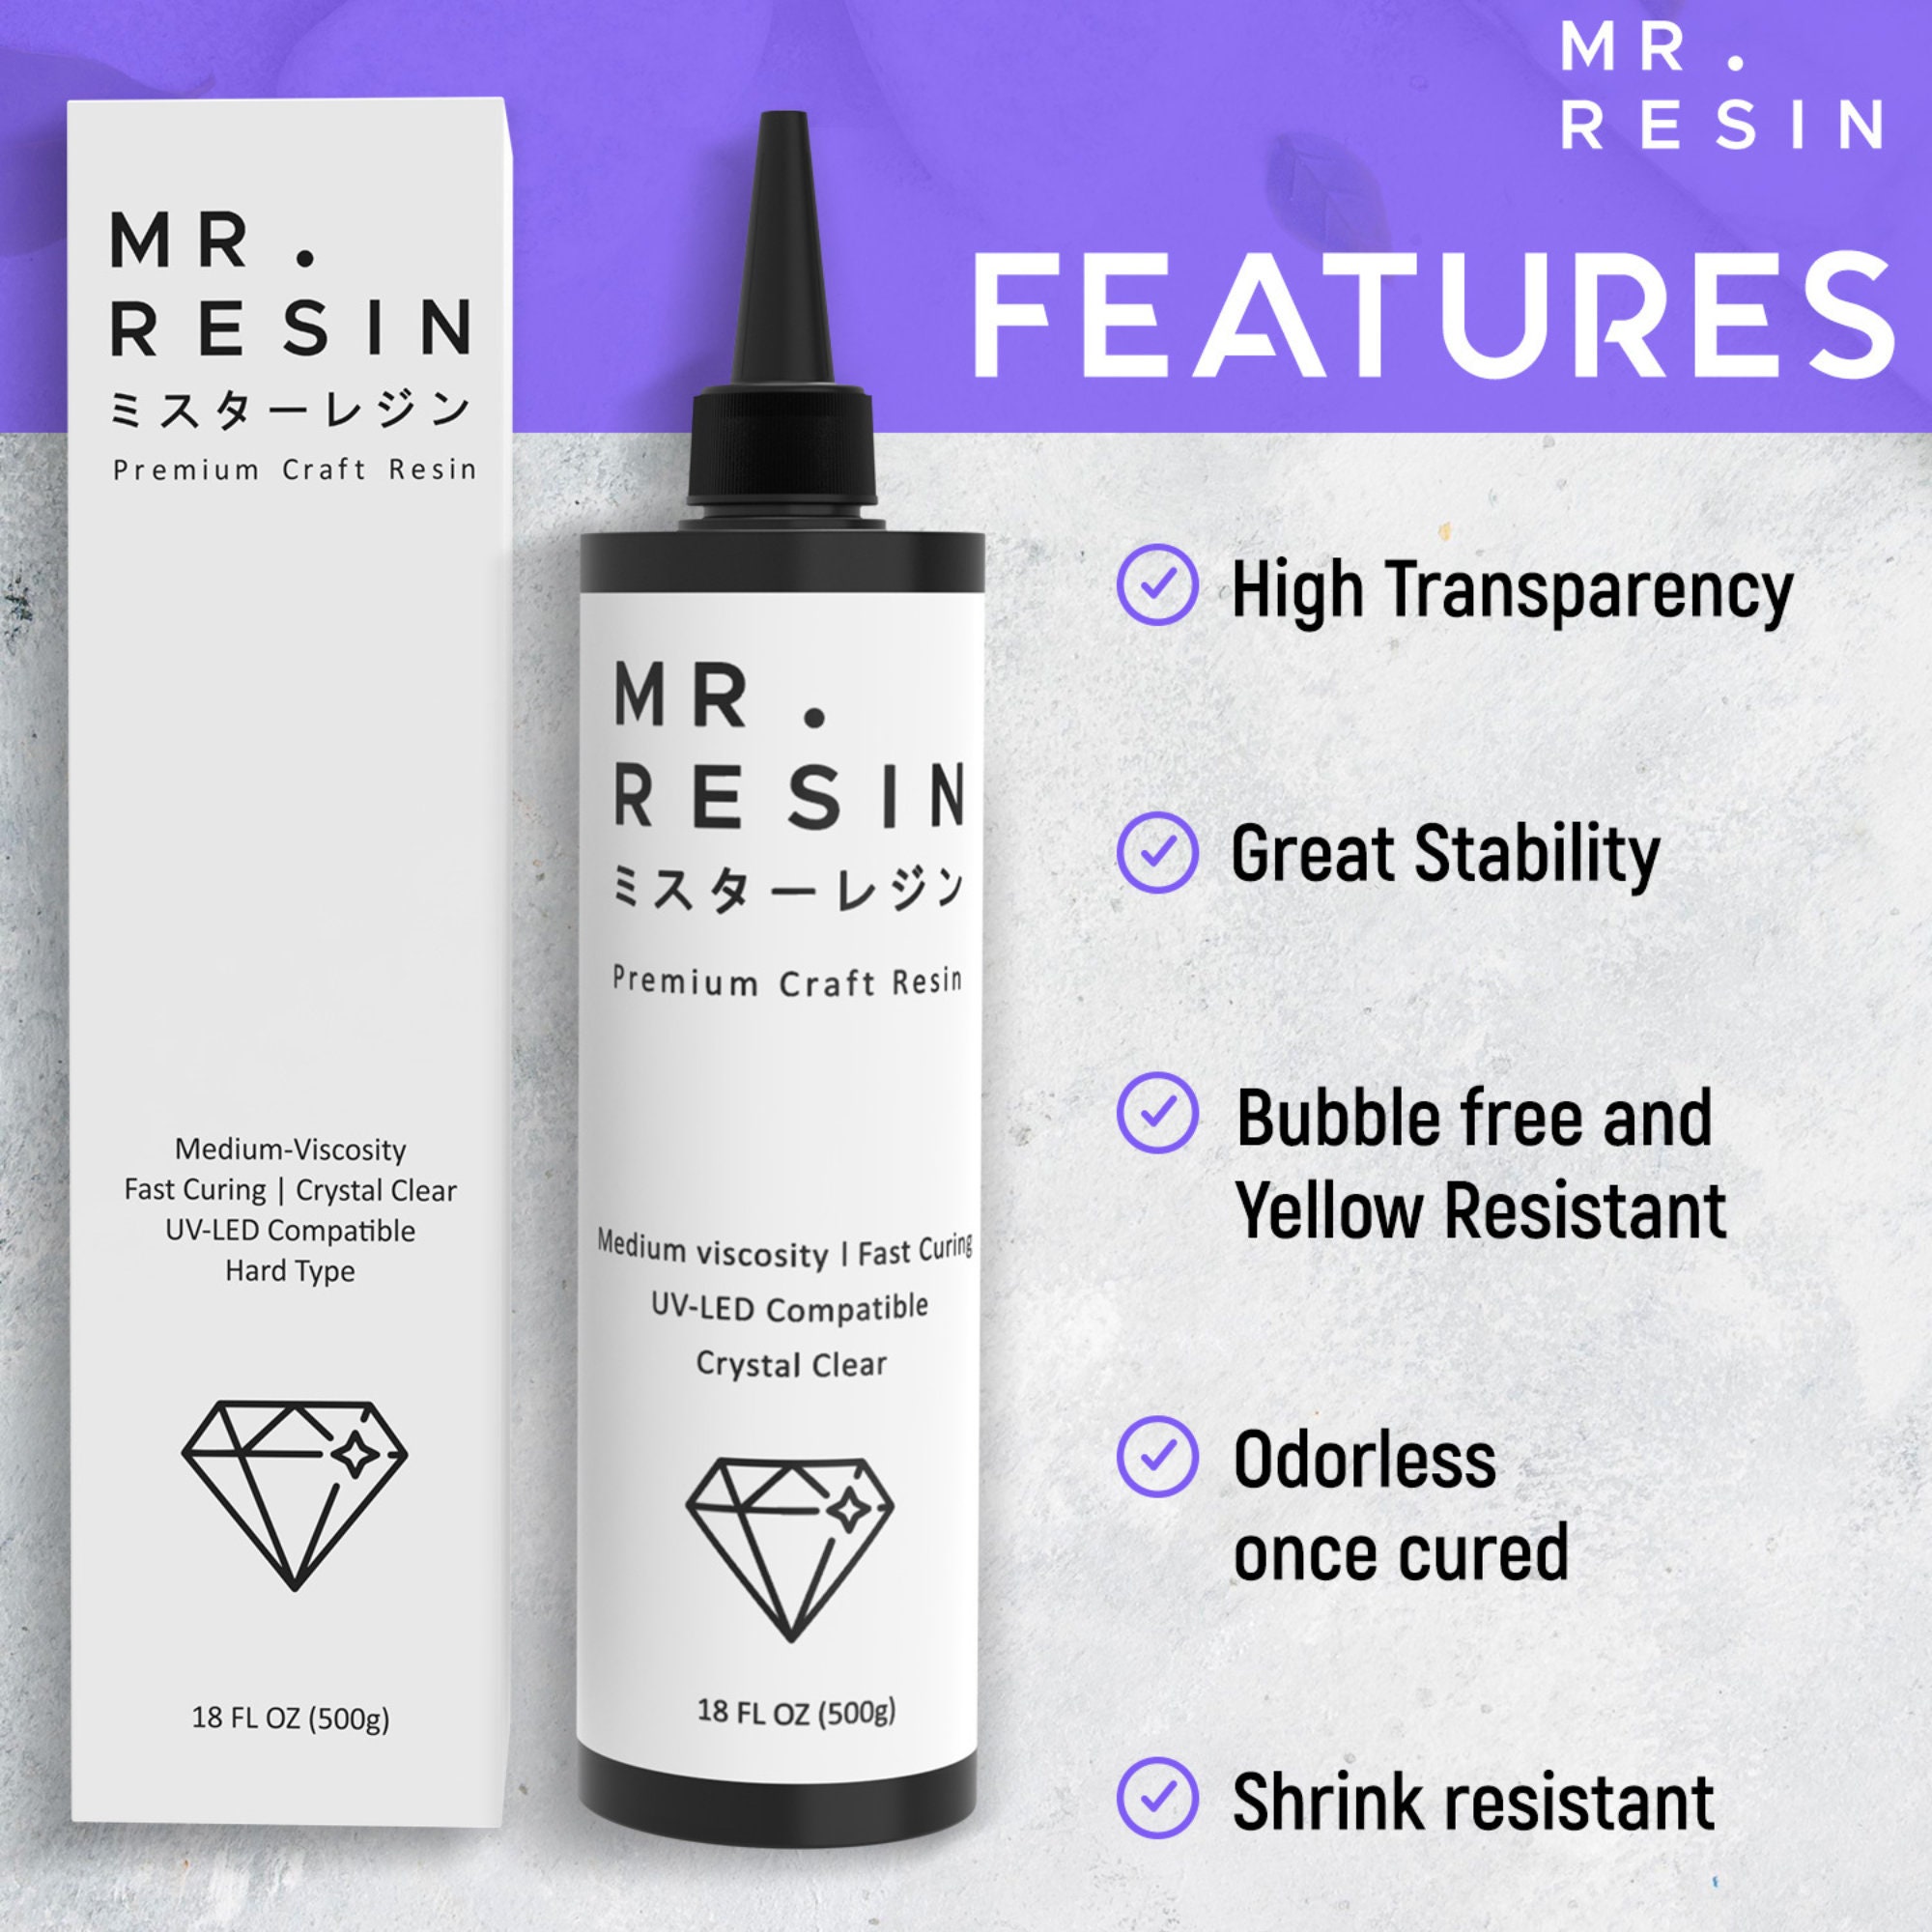 Mr.resin™ Original Craft UV Resin 36oz 1kg Crystal Clear Hard Type UV Resin  for Jewelry Making, Rock Painting & More 